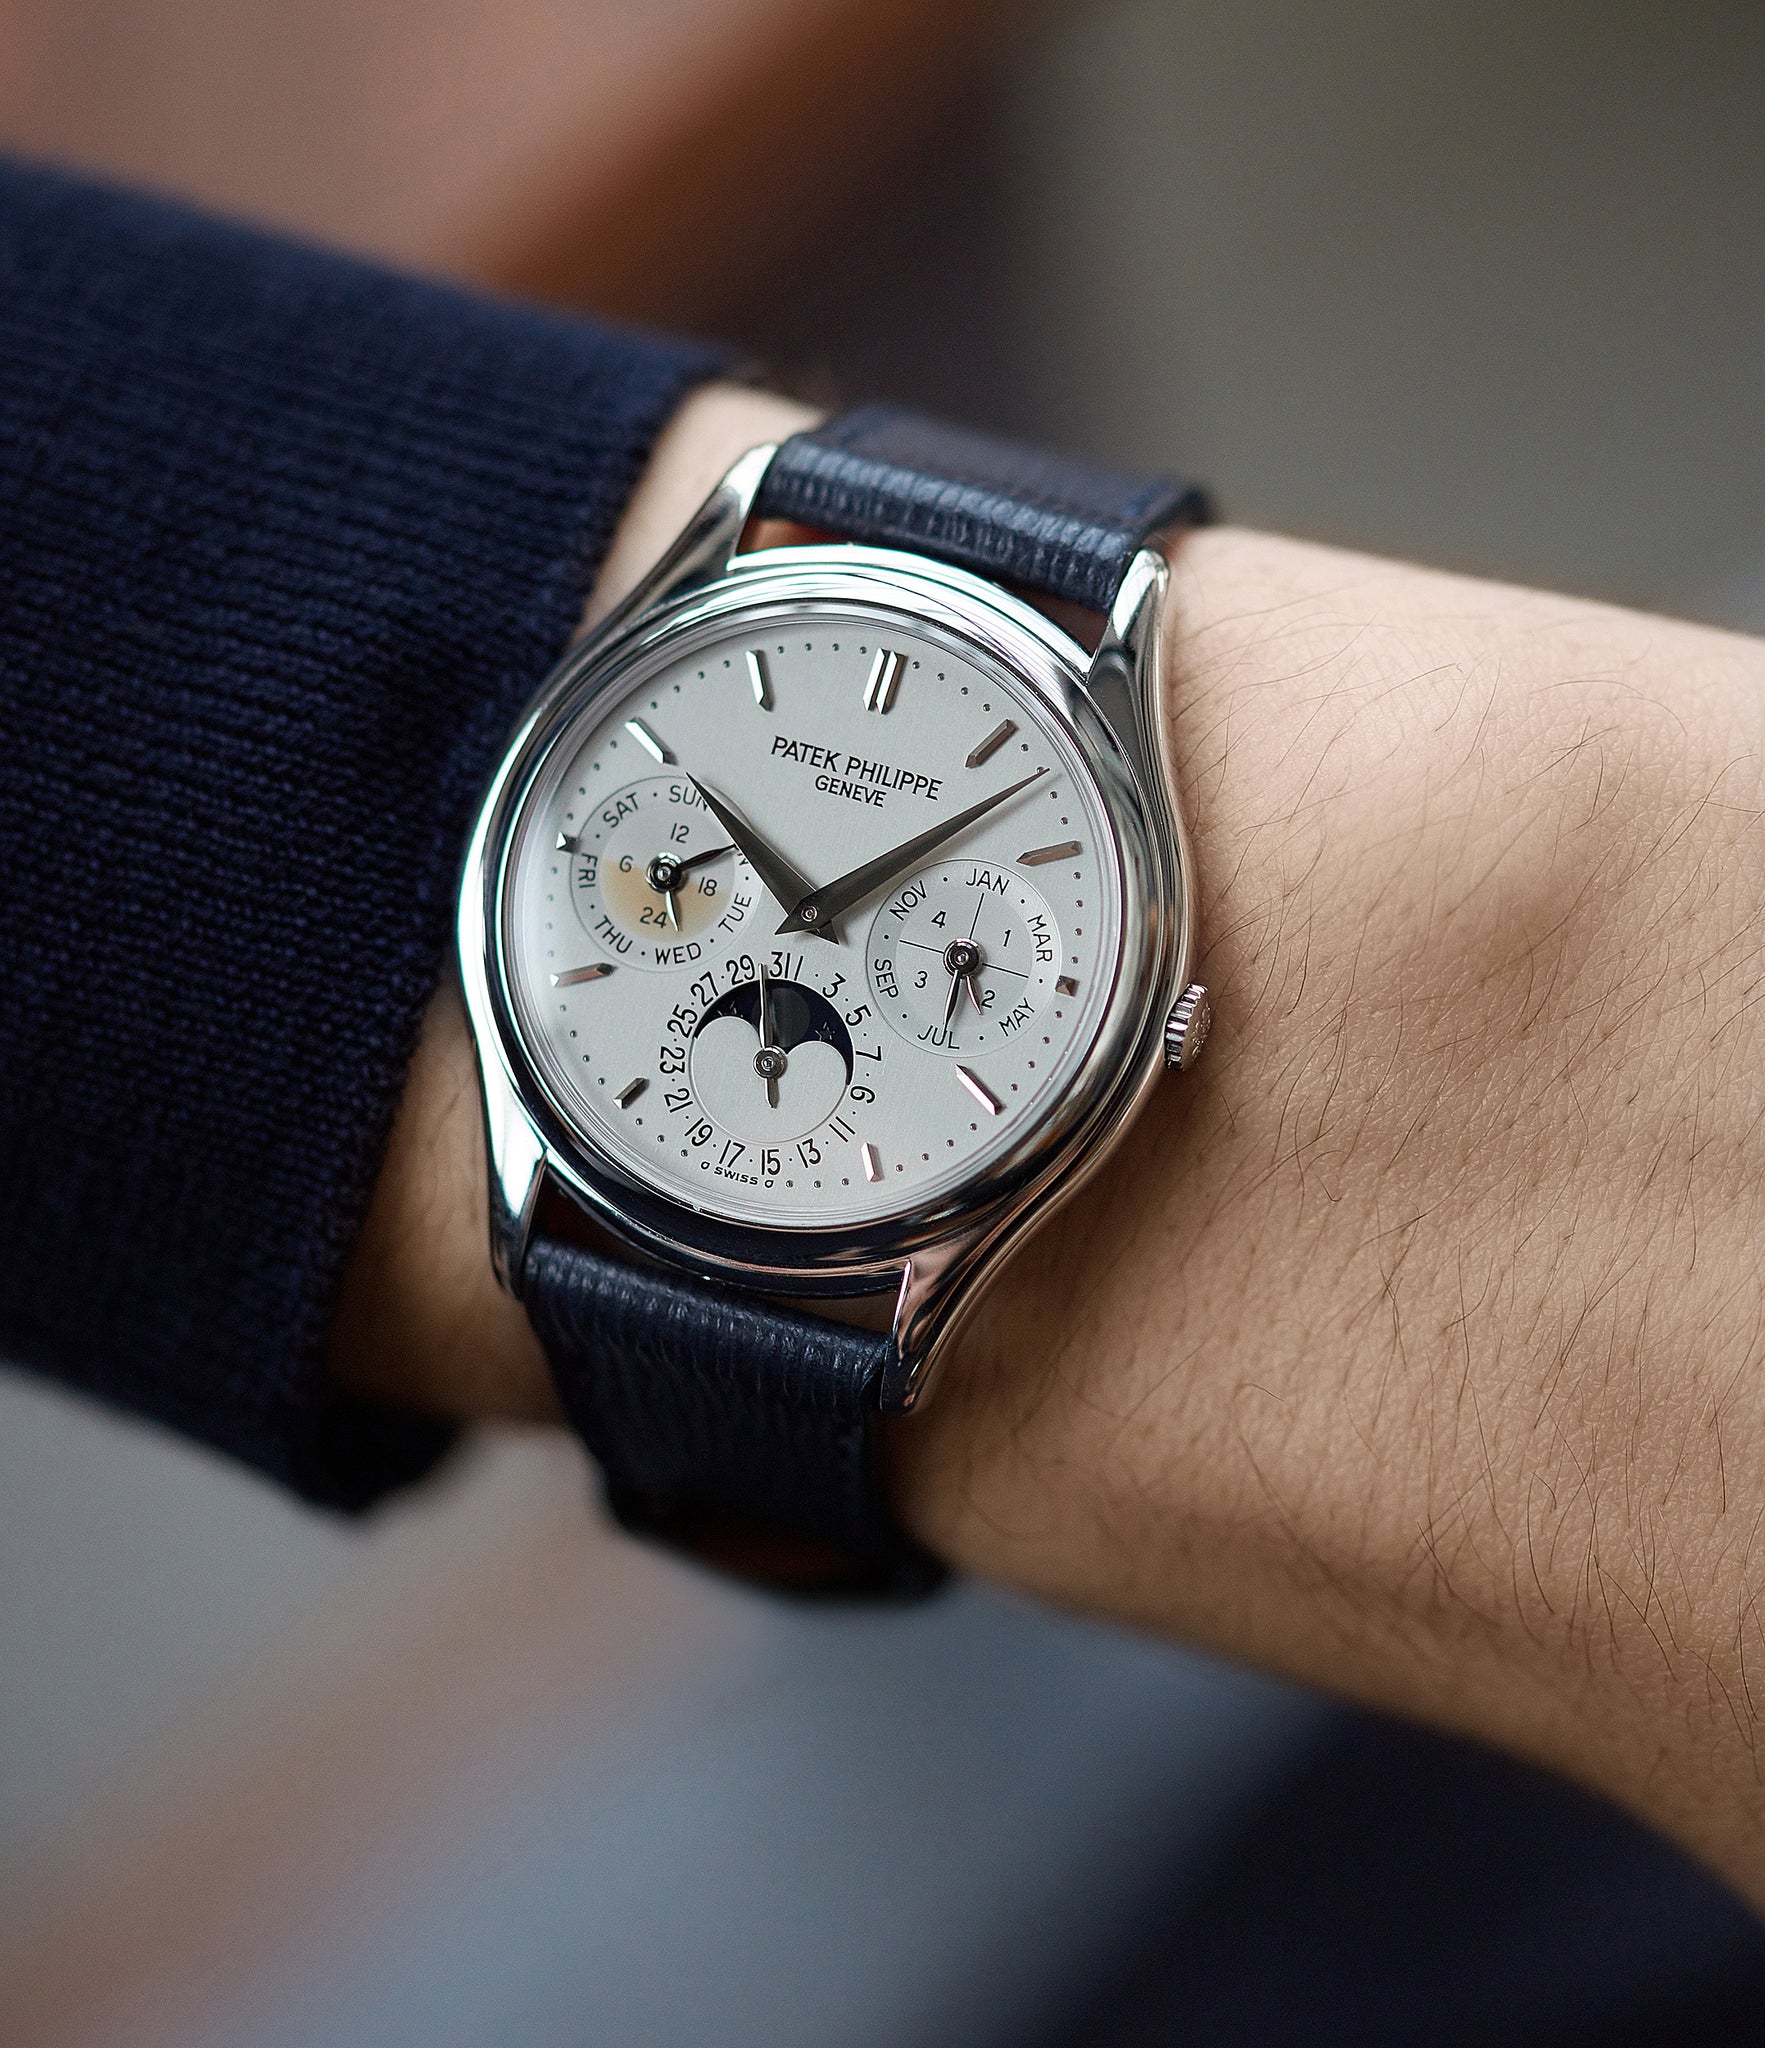 hands on with Patek Philippe 3940P platinum perpetual calendar rare dress watch full set for sale online at A Collected Man London UK specialist of rare watches